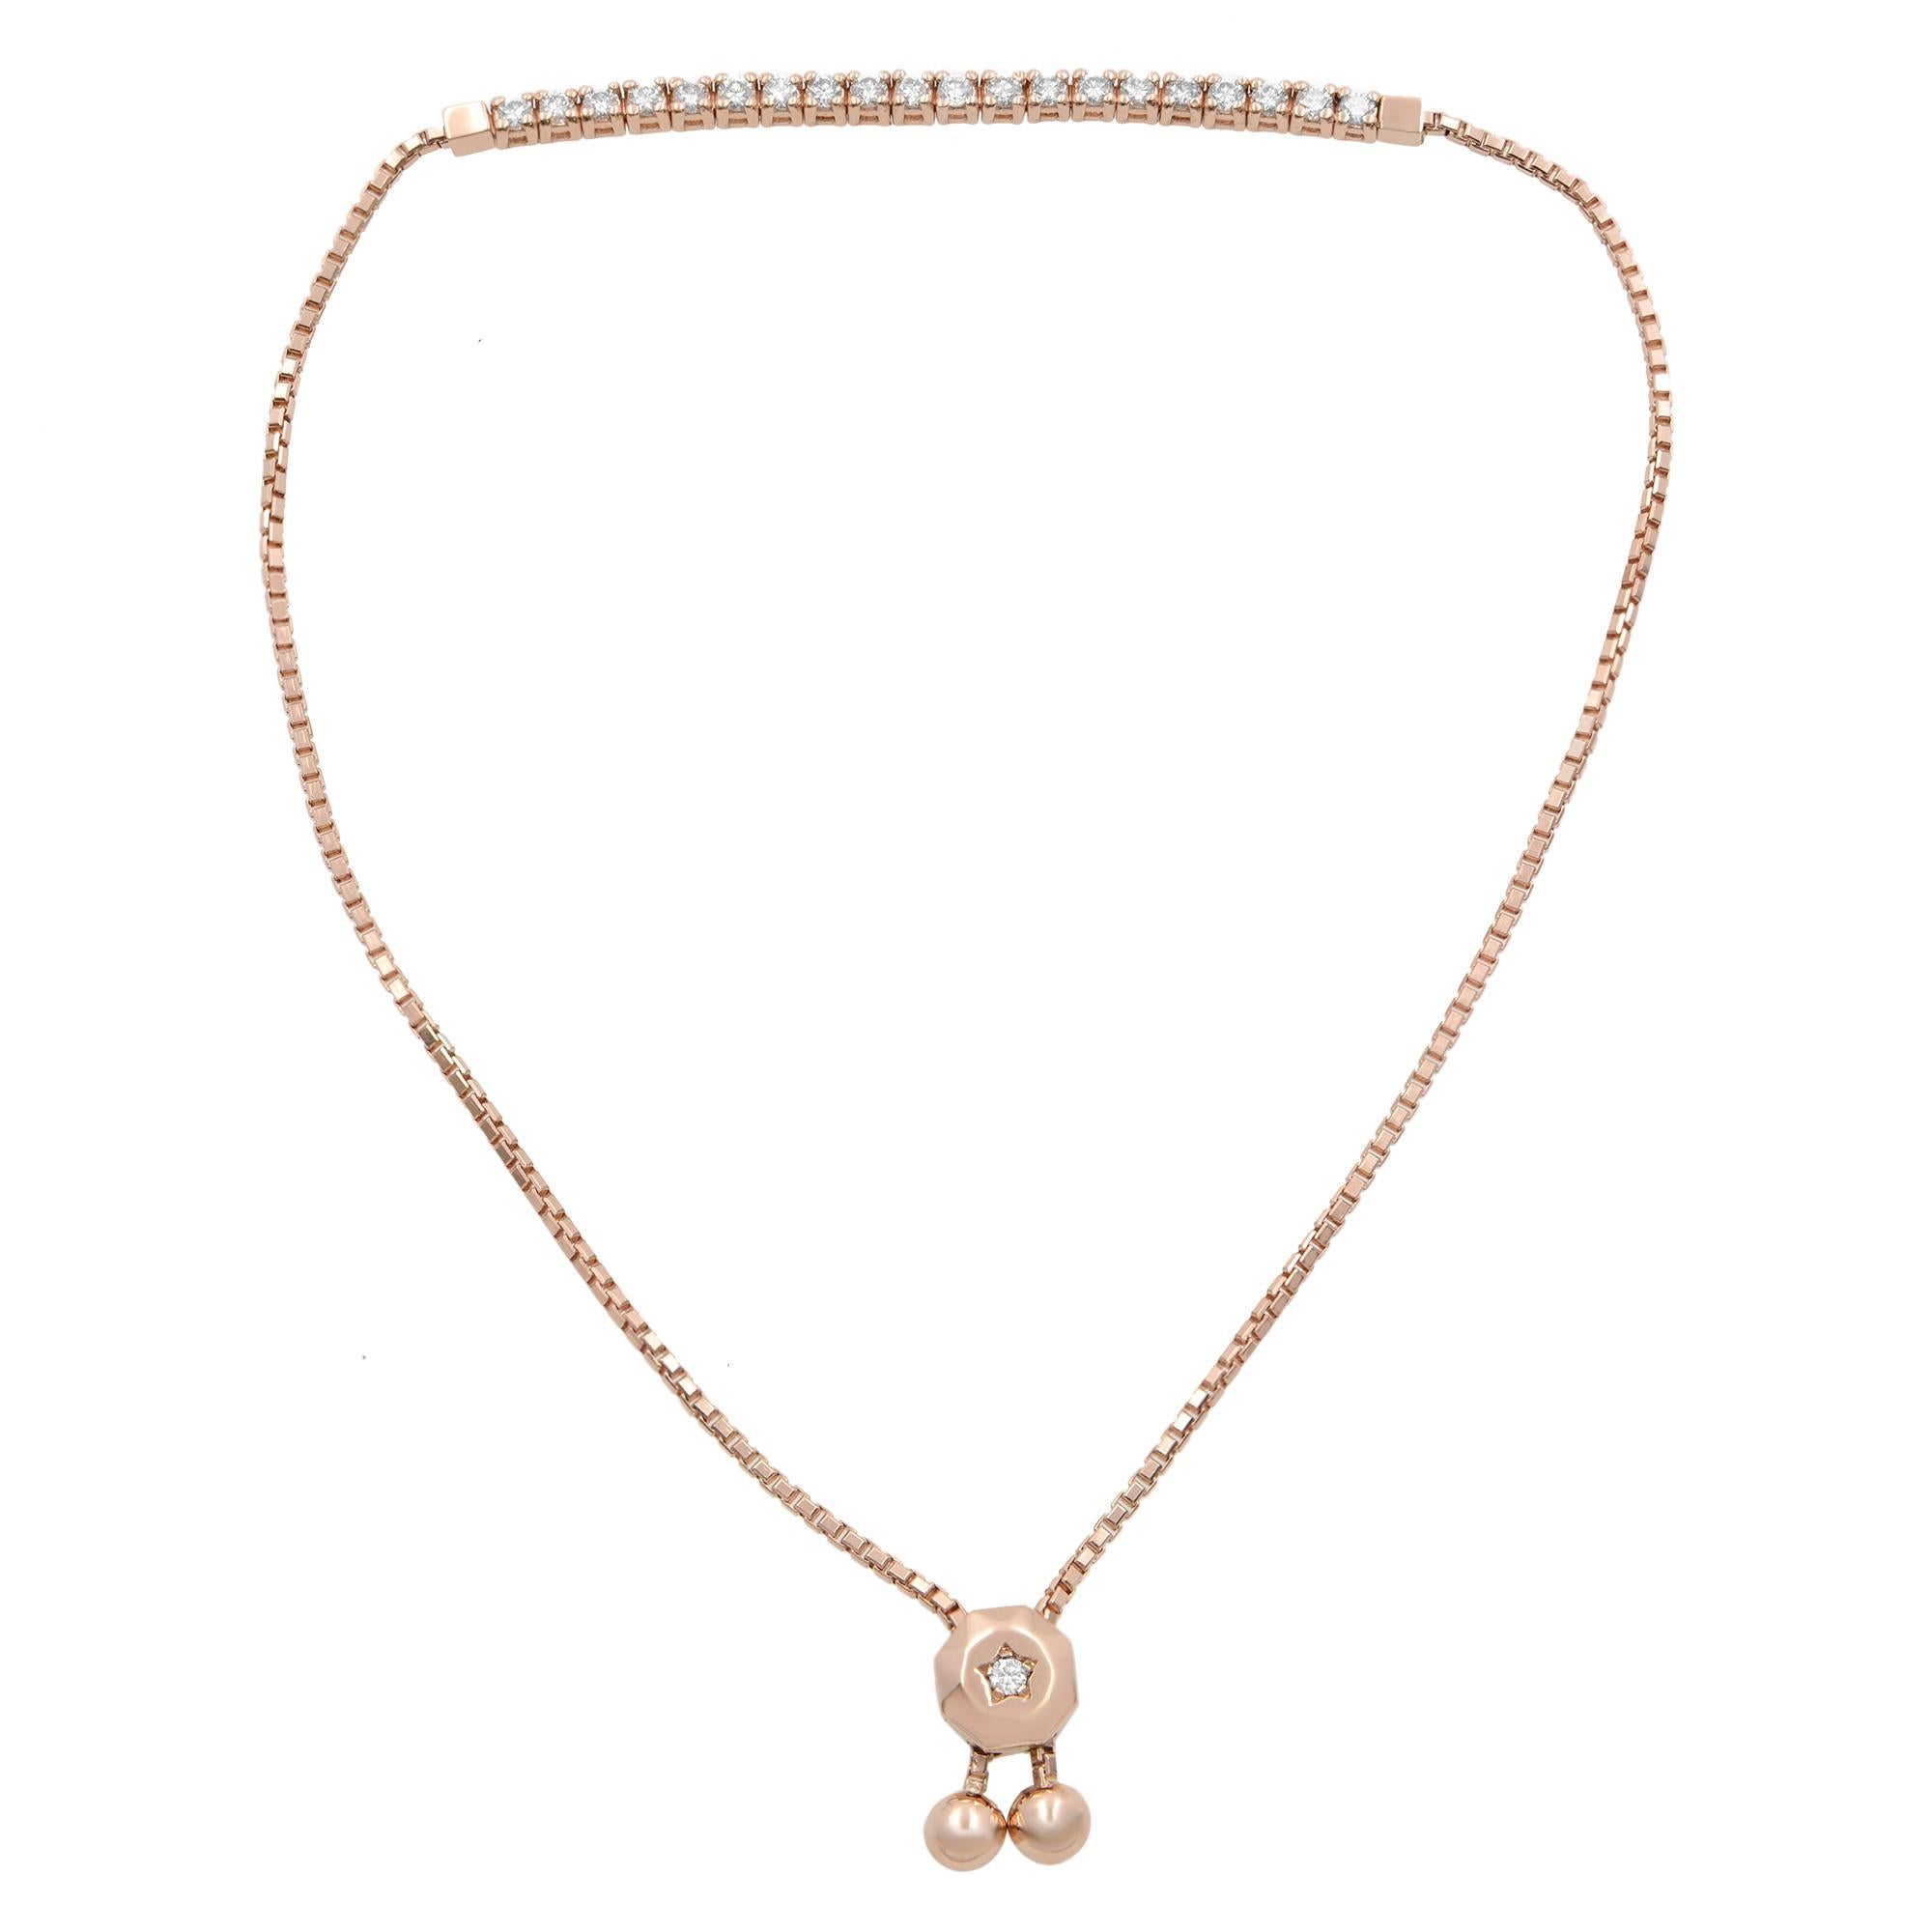 Trendy tennis bolo bracelet with a sliding lariat closure on a delicate box chain. Super comfortable, so easy to wear! The design is shimmered with 22 round brilliant cut diamonds totaling 0.50 carats. The bracelet is made of fine 14K Rose Gold and